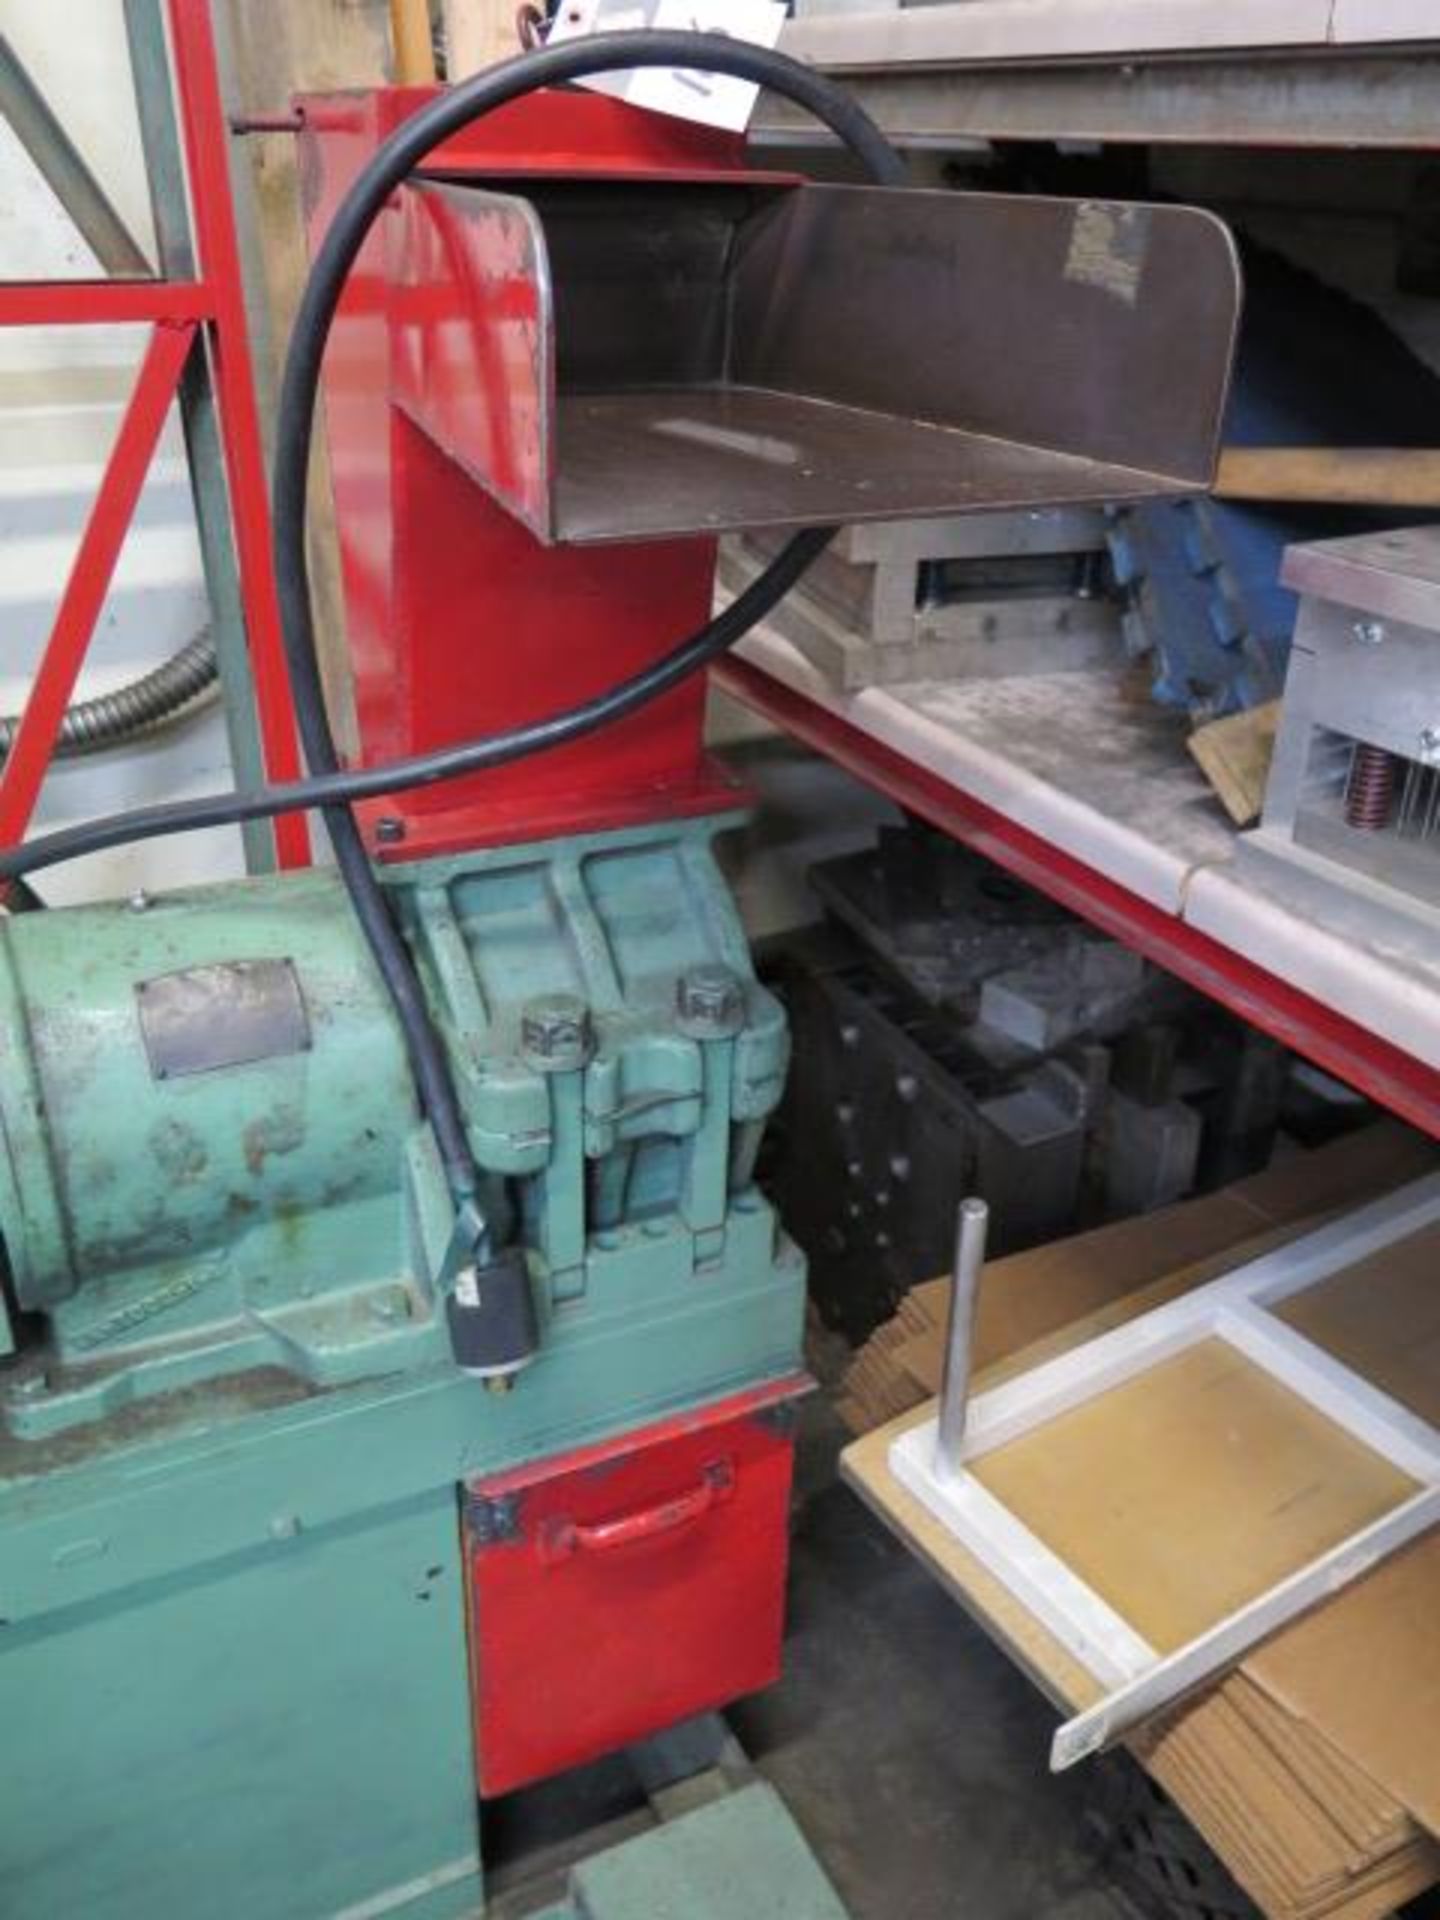 Cumberland Size # ½ 8” Plastics Granulator s/n 9751-55 (SOLD AS-IS - NO WARRANTY) - Image 4 of 6